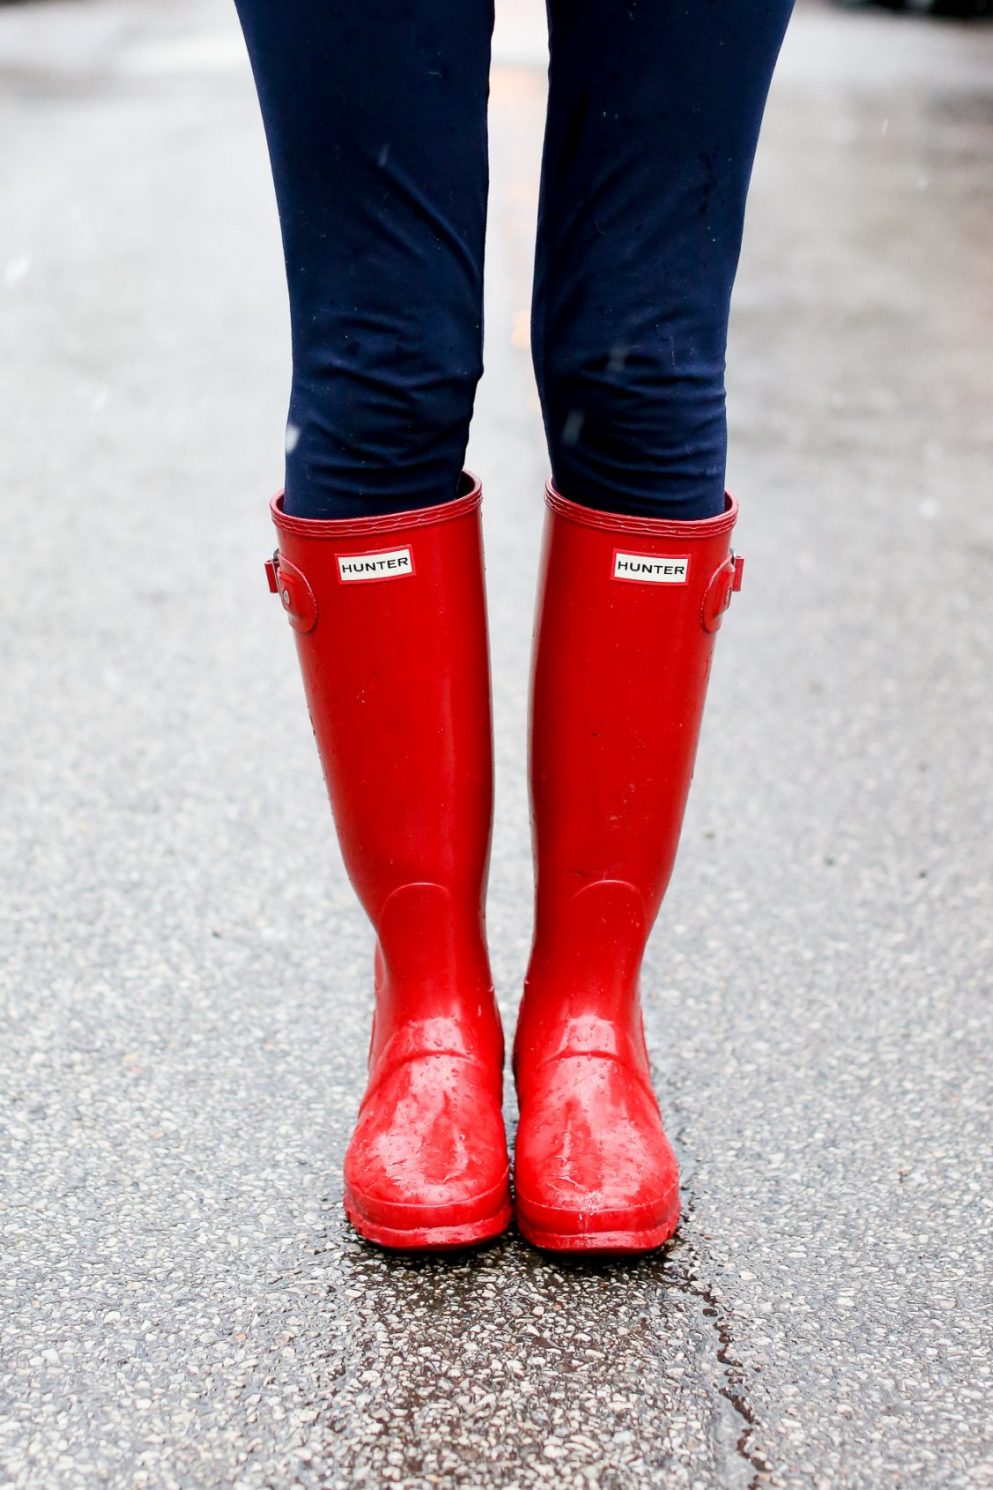 Rain Boots – For Fashion or Function?